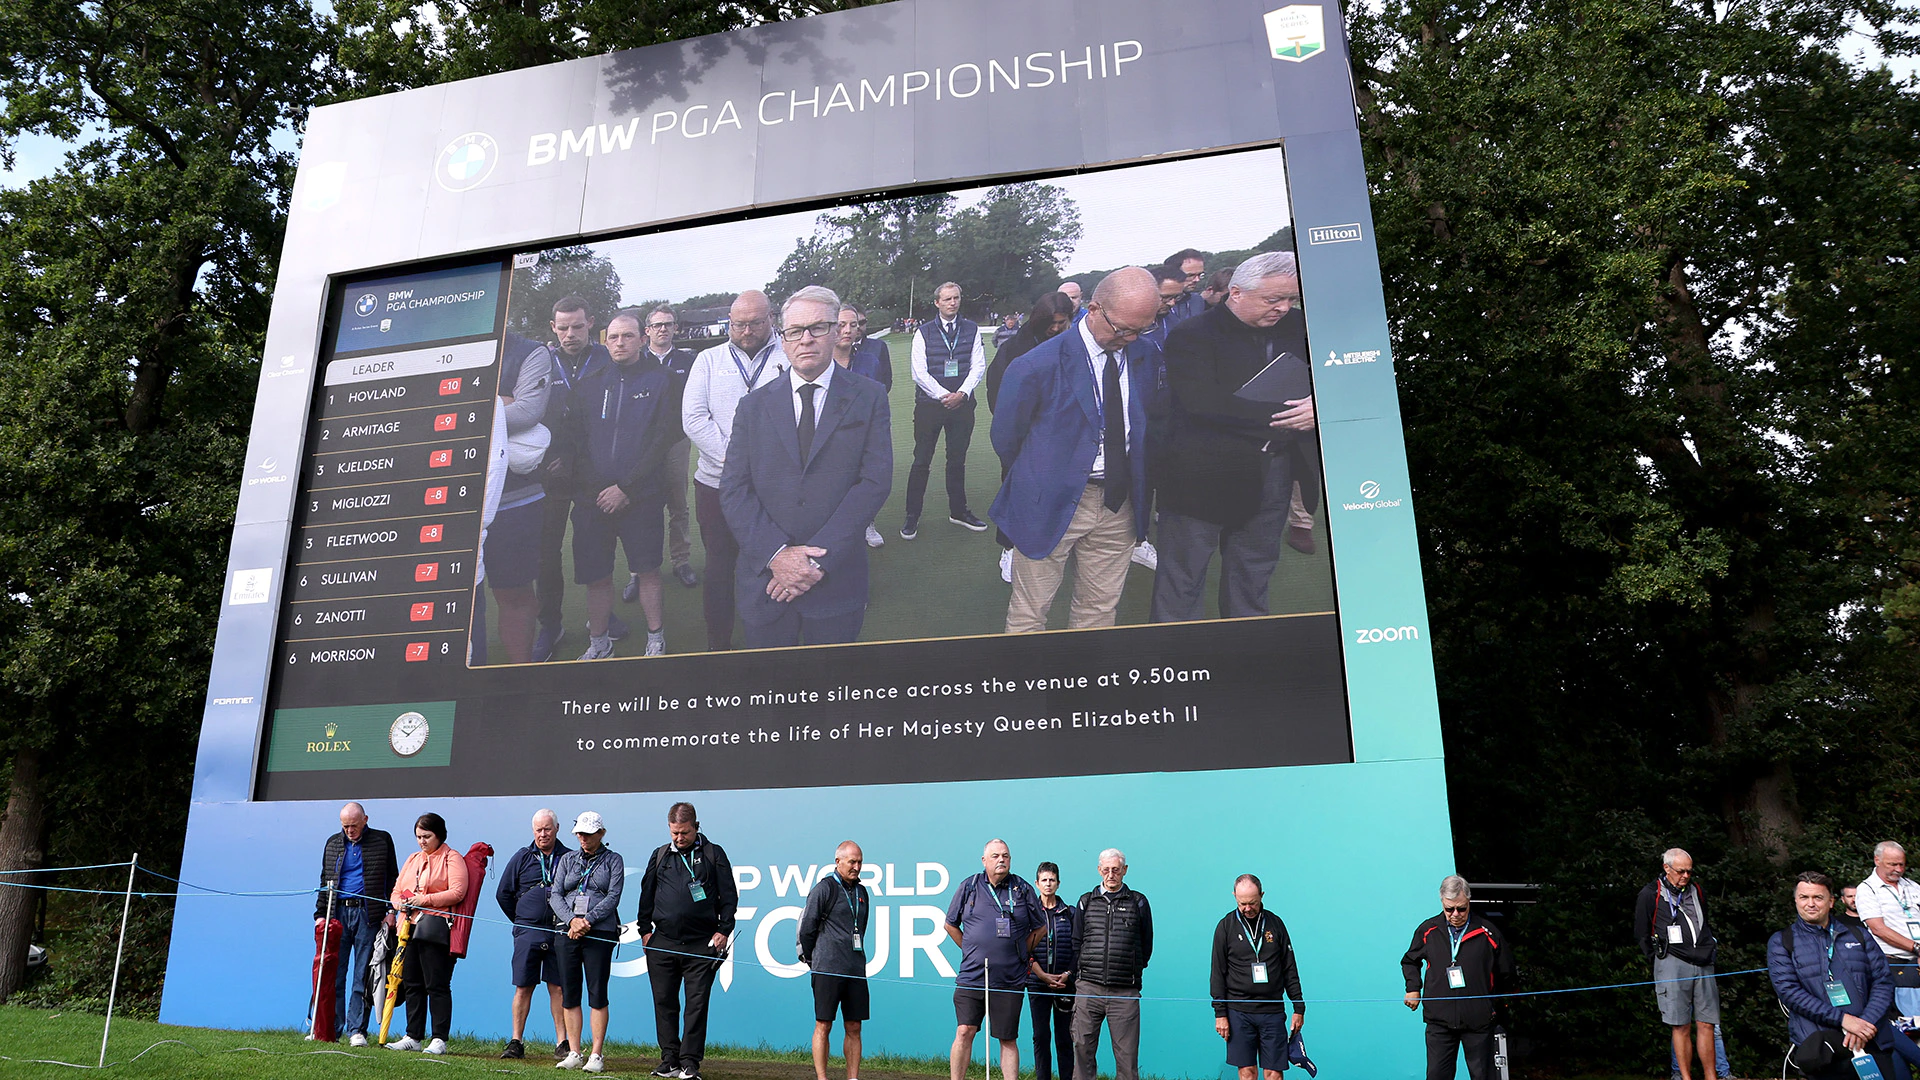 Moment of silence held for Queen Elizabeth II Saturday at BMW PGA Championship